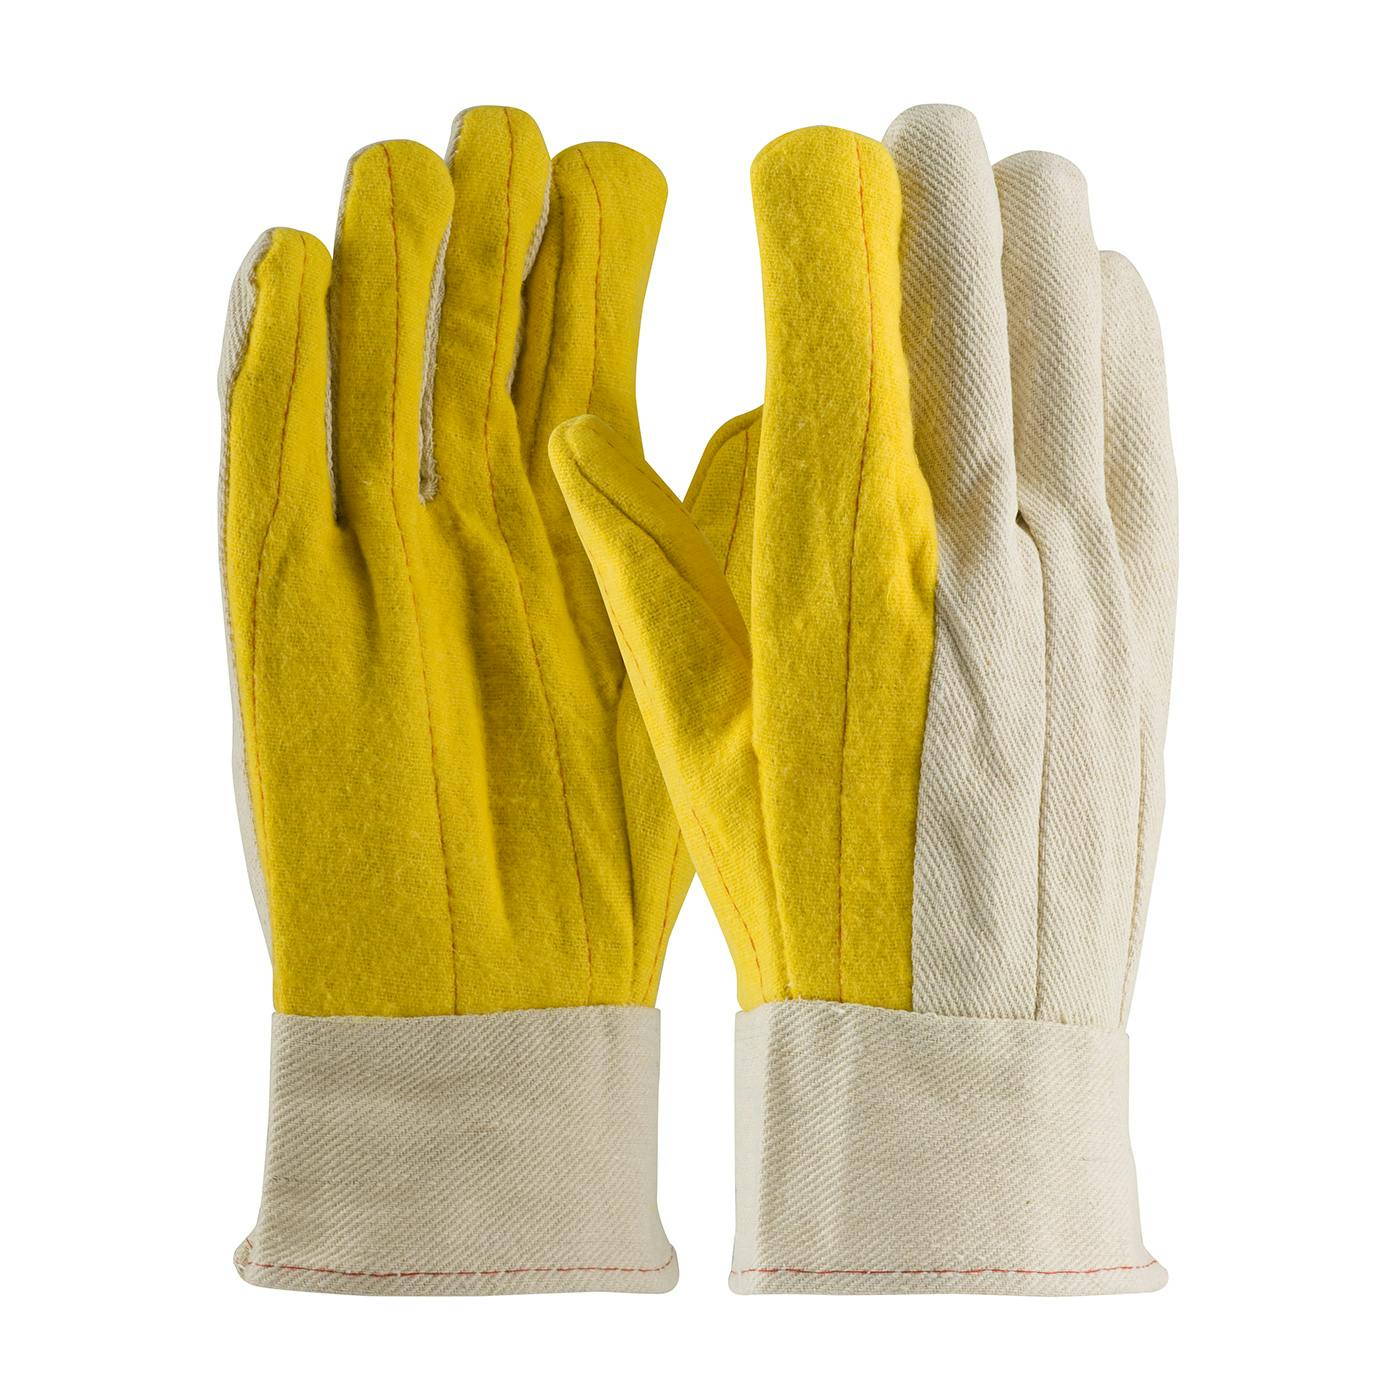 Regular Grade Chore Glove with Double Layer Palm, Canvas Back and Nap-Out Finish - Band Top, Natural (M18BT) - L